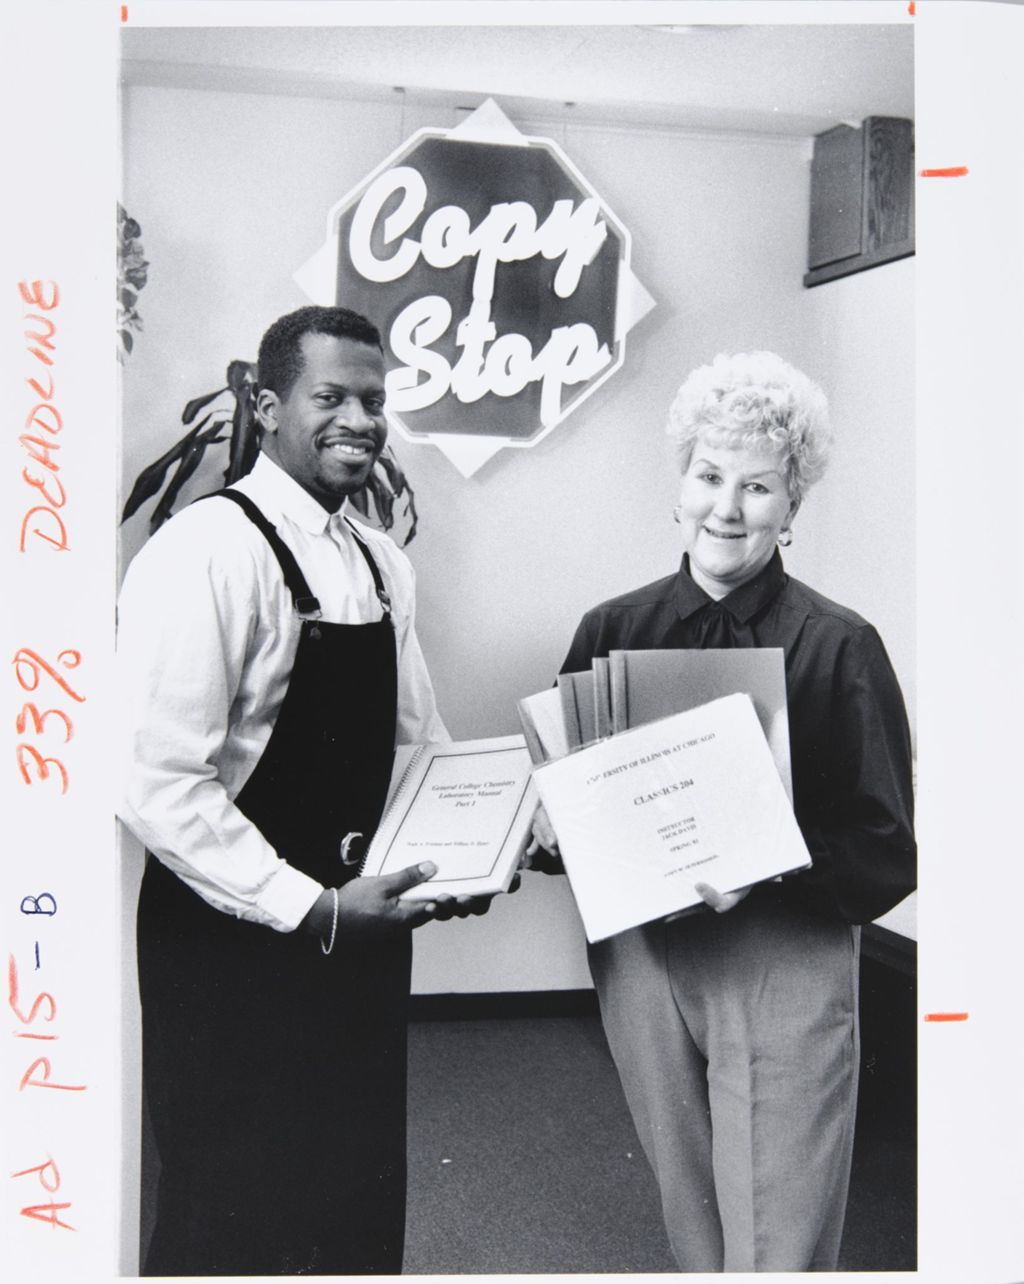 Miniature of Staff at the Campus Bookstore called the Copy Stop